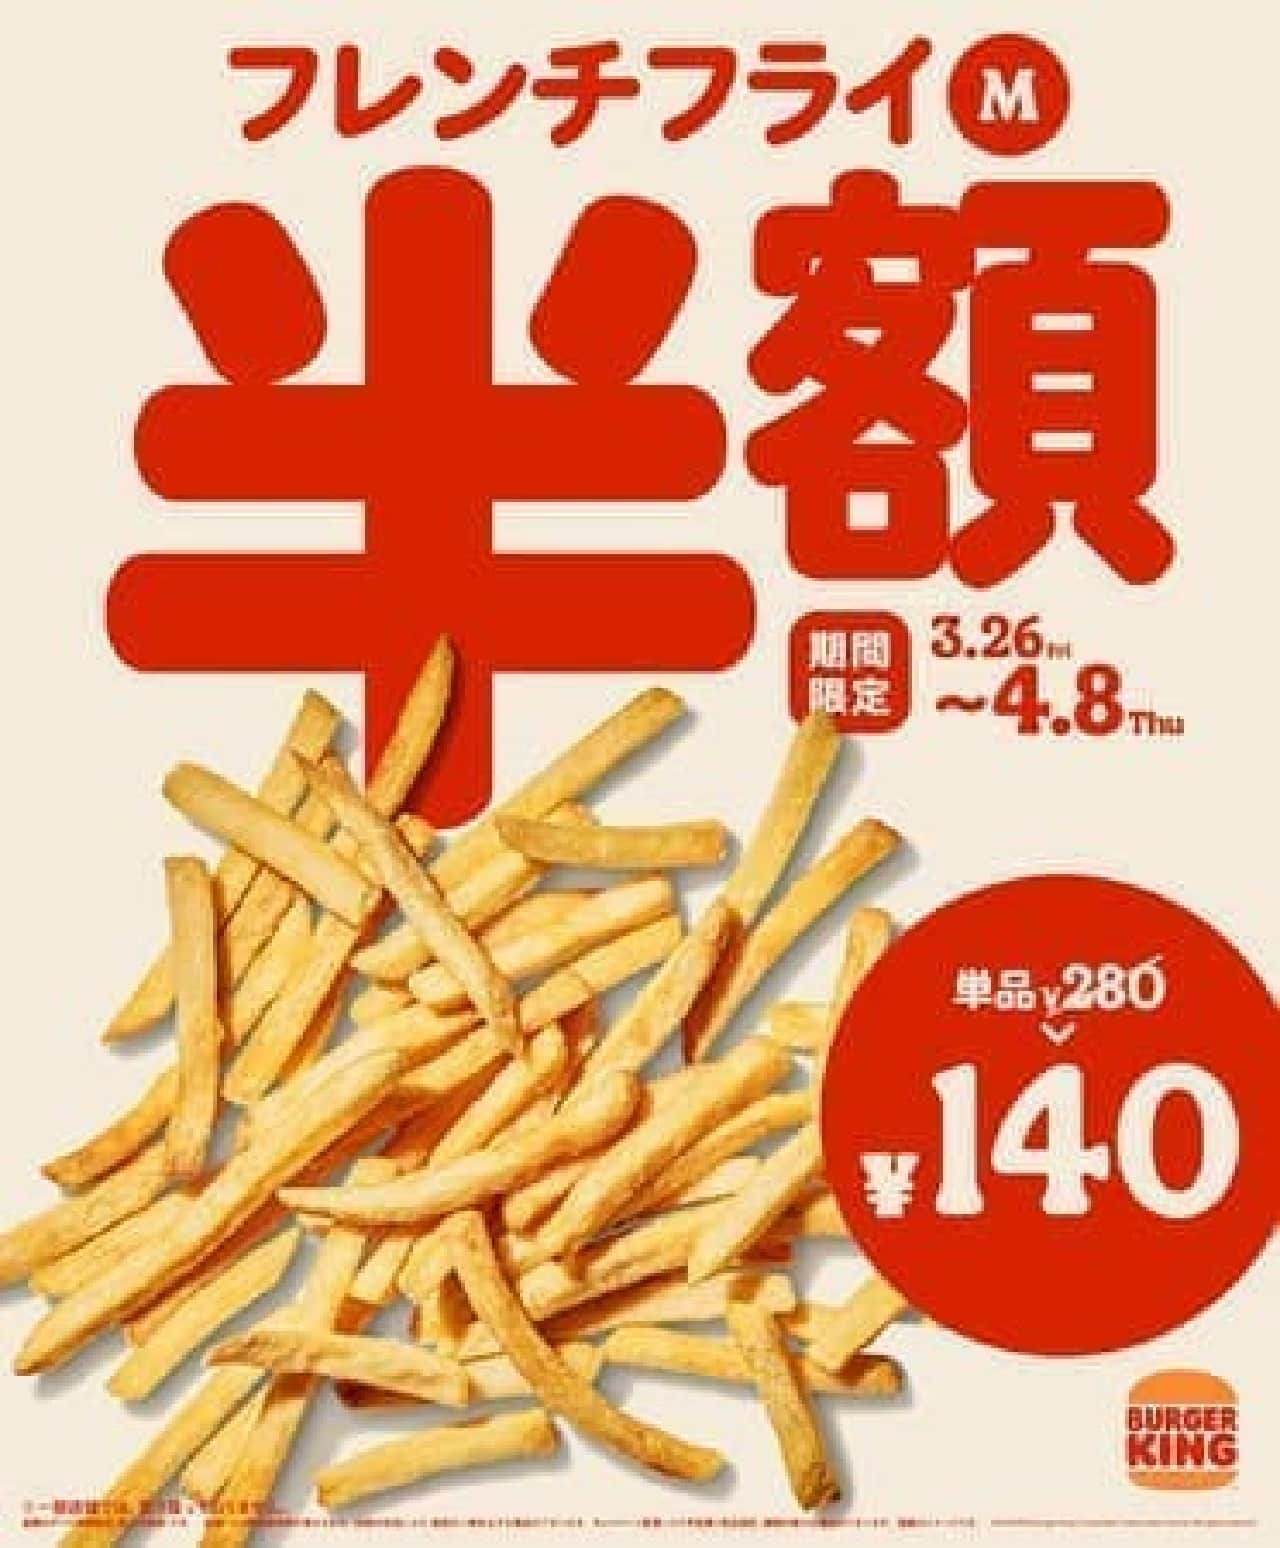 Burger King "French fries half price" limited to 2 weeks